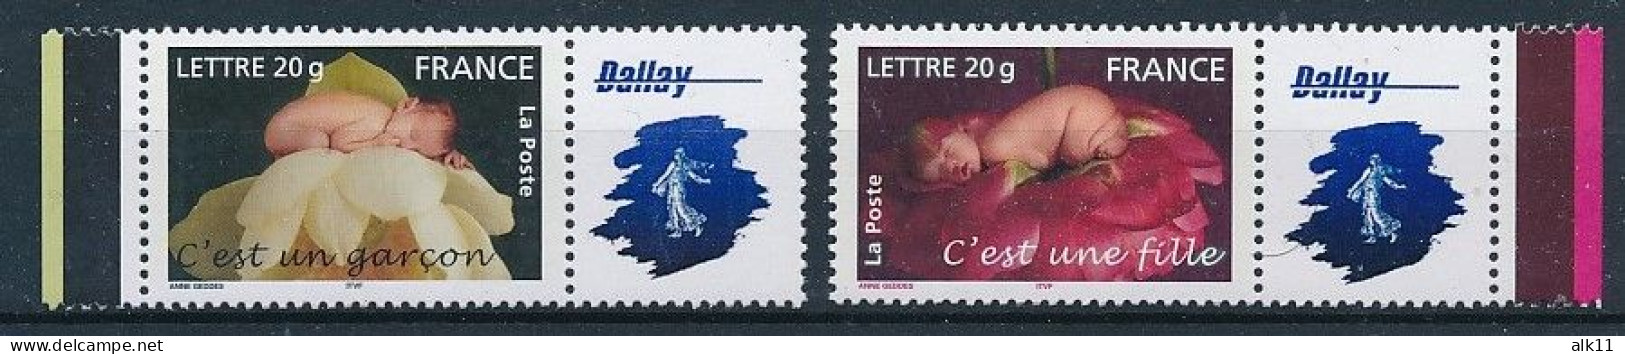 France 2005 - F3804Aa 3805Aa Deux Timbres Fille Et Garcon Personnalisés Logo Dallay  - Neuf - Unused Stamps